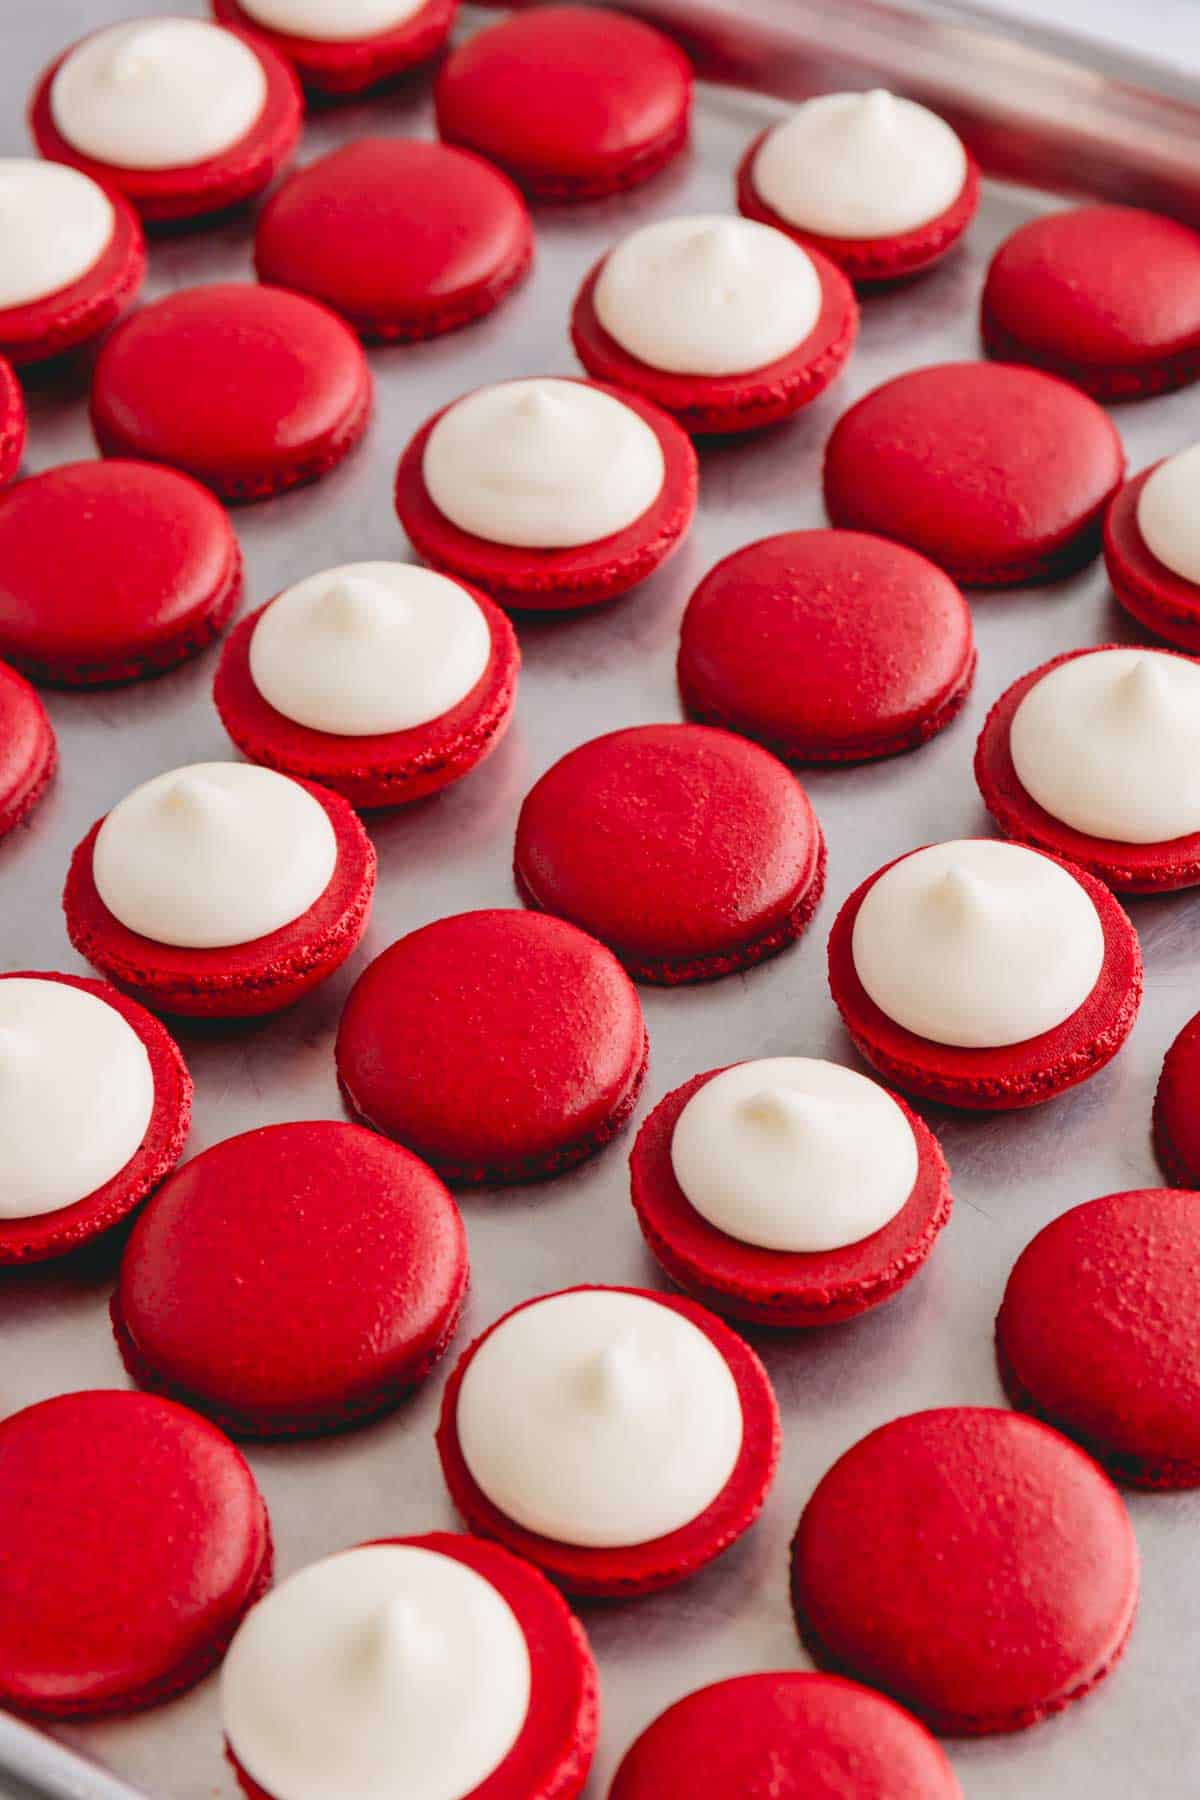 Red velvet macaron shells arranged on a baking sheet and half of the shells with cream cheese frosting.